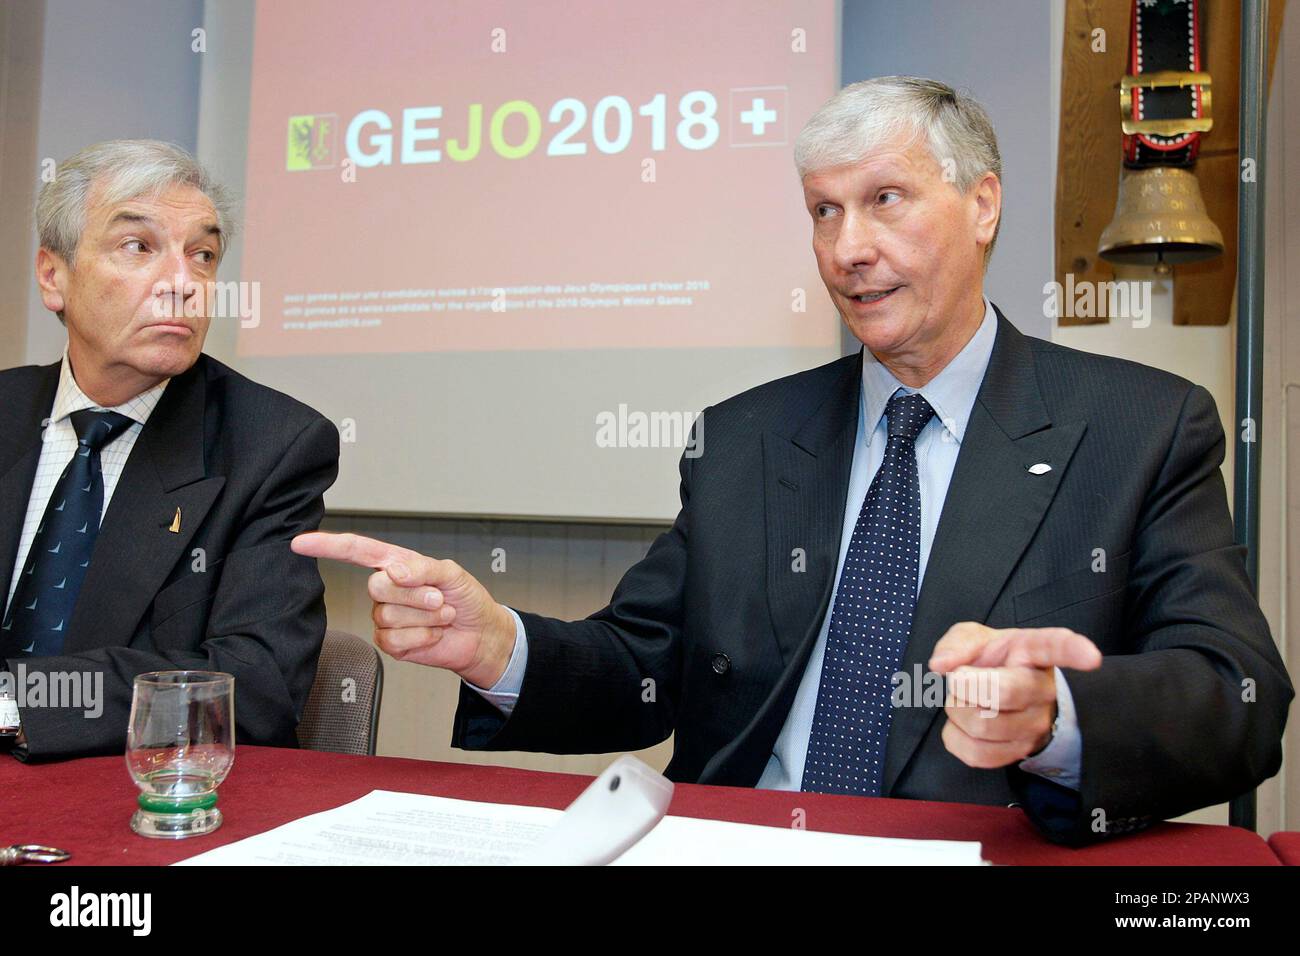 Marco Torriani, right, Chairman of the GEJO (Geneva Jeux Olympiques)  Exploratory Committee, sits next to Jean-Pierre Jobin, left, Member of the  GEJO (Geneva Jeux Olympiques) Exploratory Committee as they answer  journalist's questions